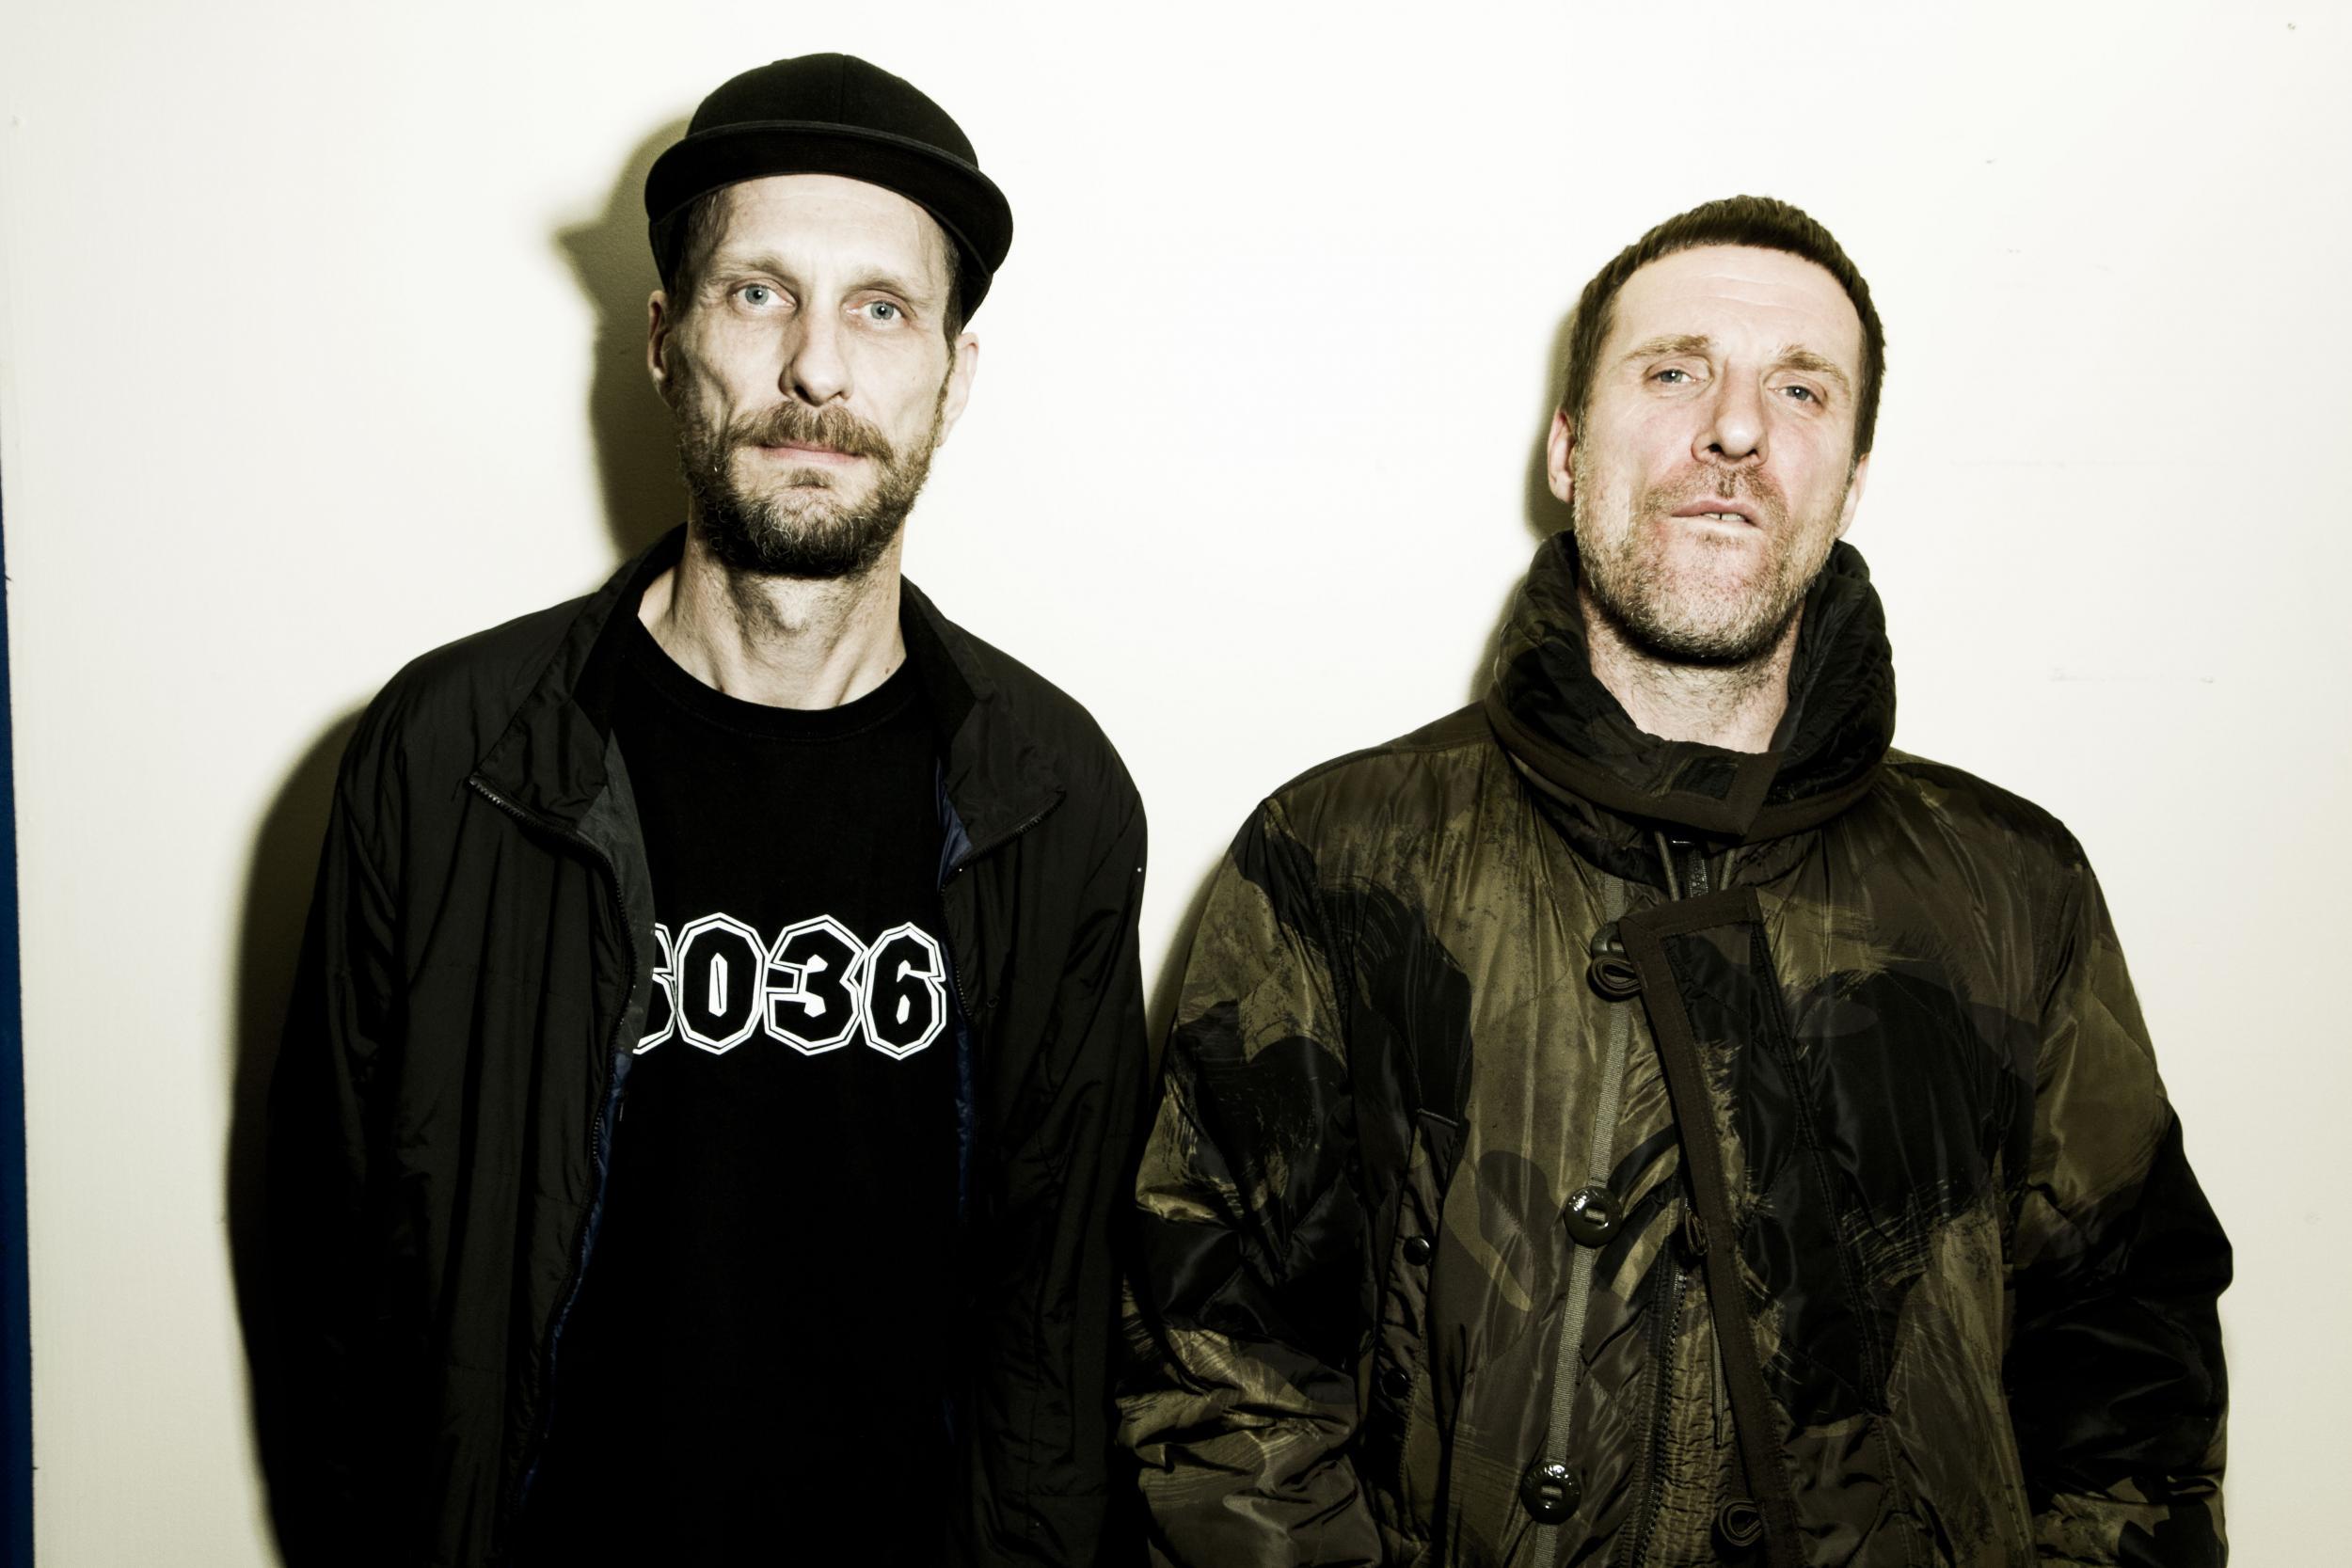  Interview with Sleaford Mods Ahead of Liverpool O2 Academy Show